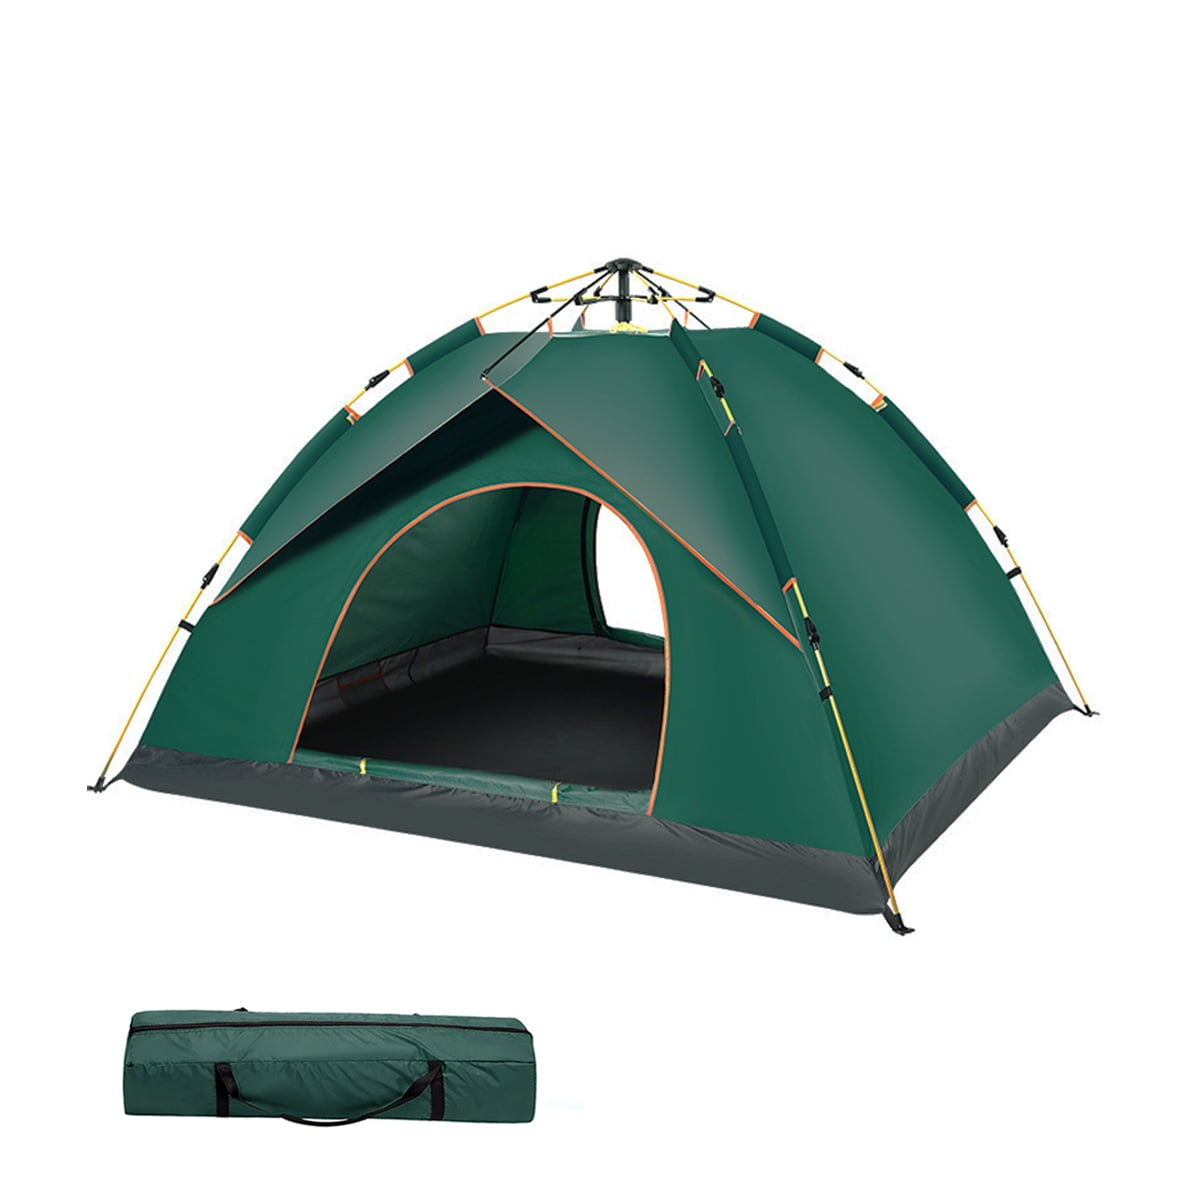 Instant Automatic pop up Camping Tent, 3-4 Persons Lightweight Tent, UV  Protection, Perfect for Beach, Outdoor, Traveling, Hiking, Camping,  Hunting,